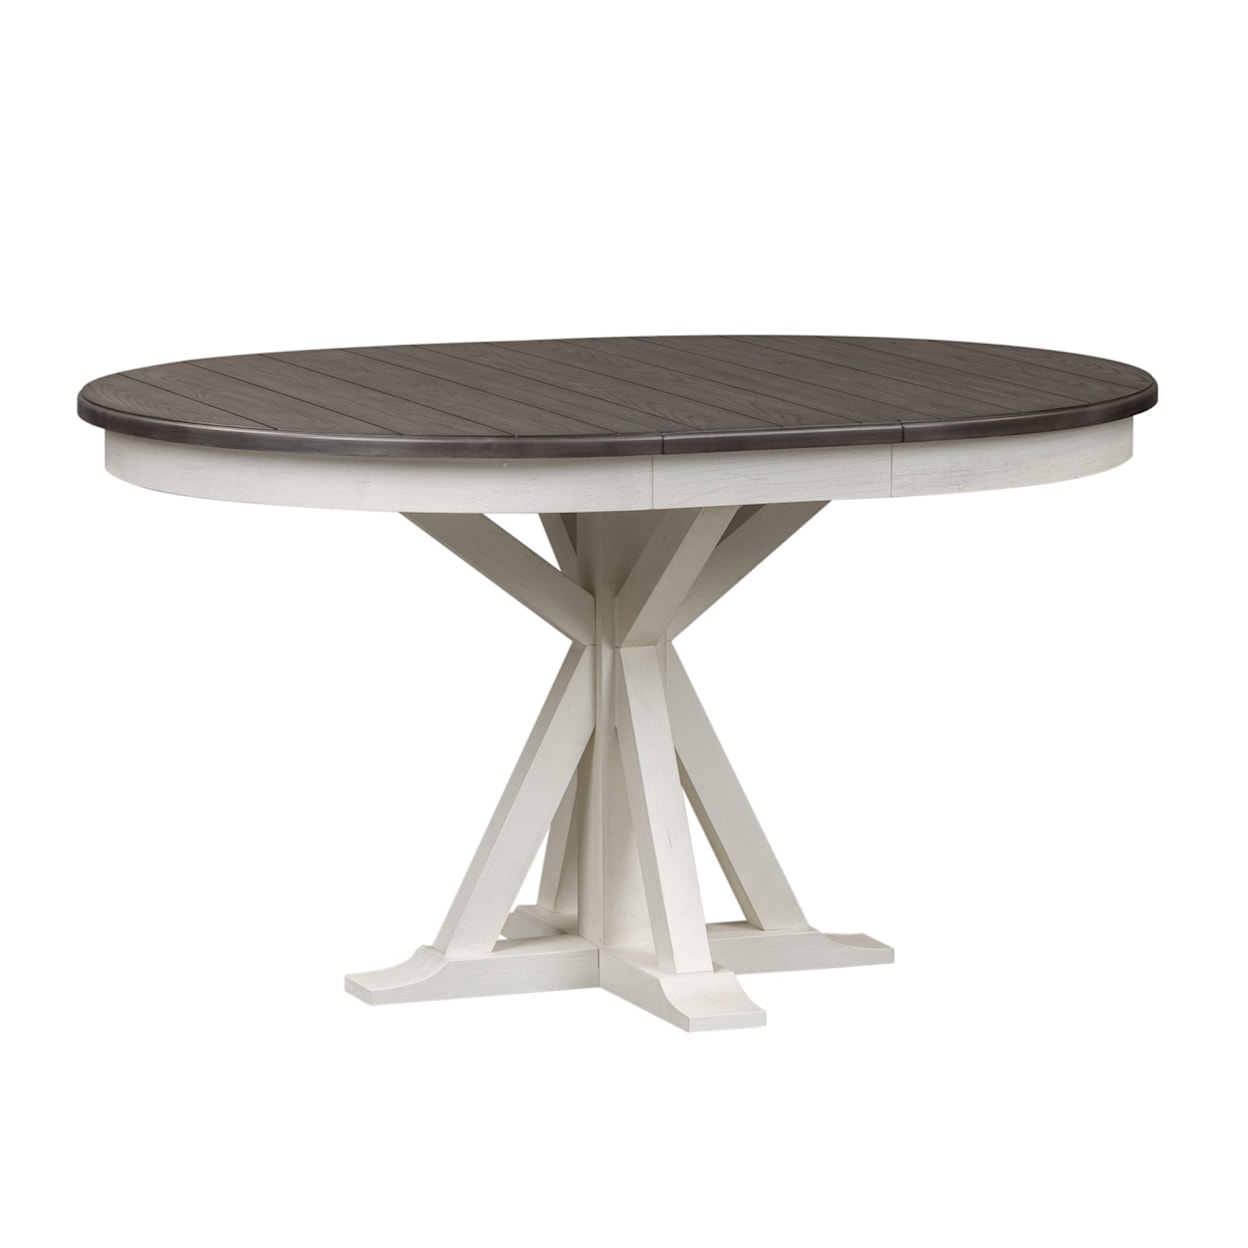 Liberty Furniture Allyson Park Round Dining Room Table